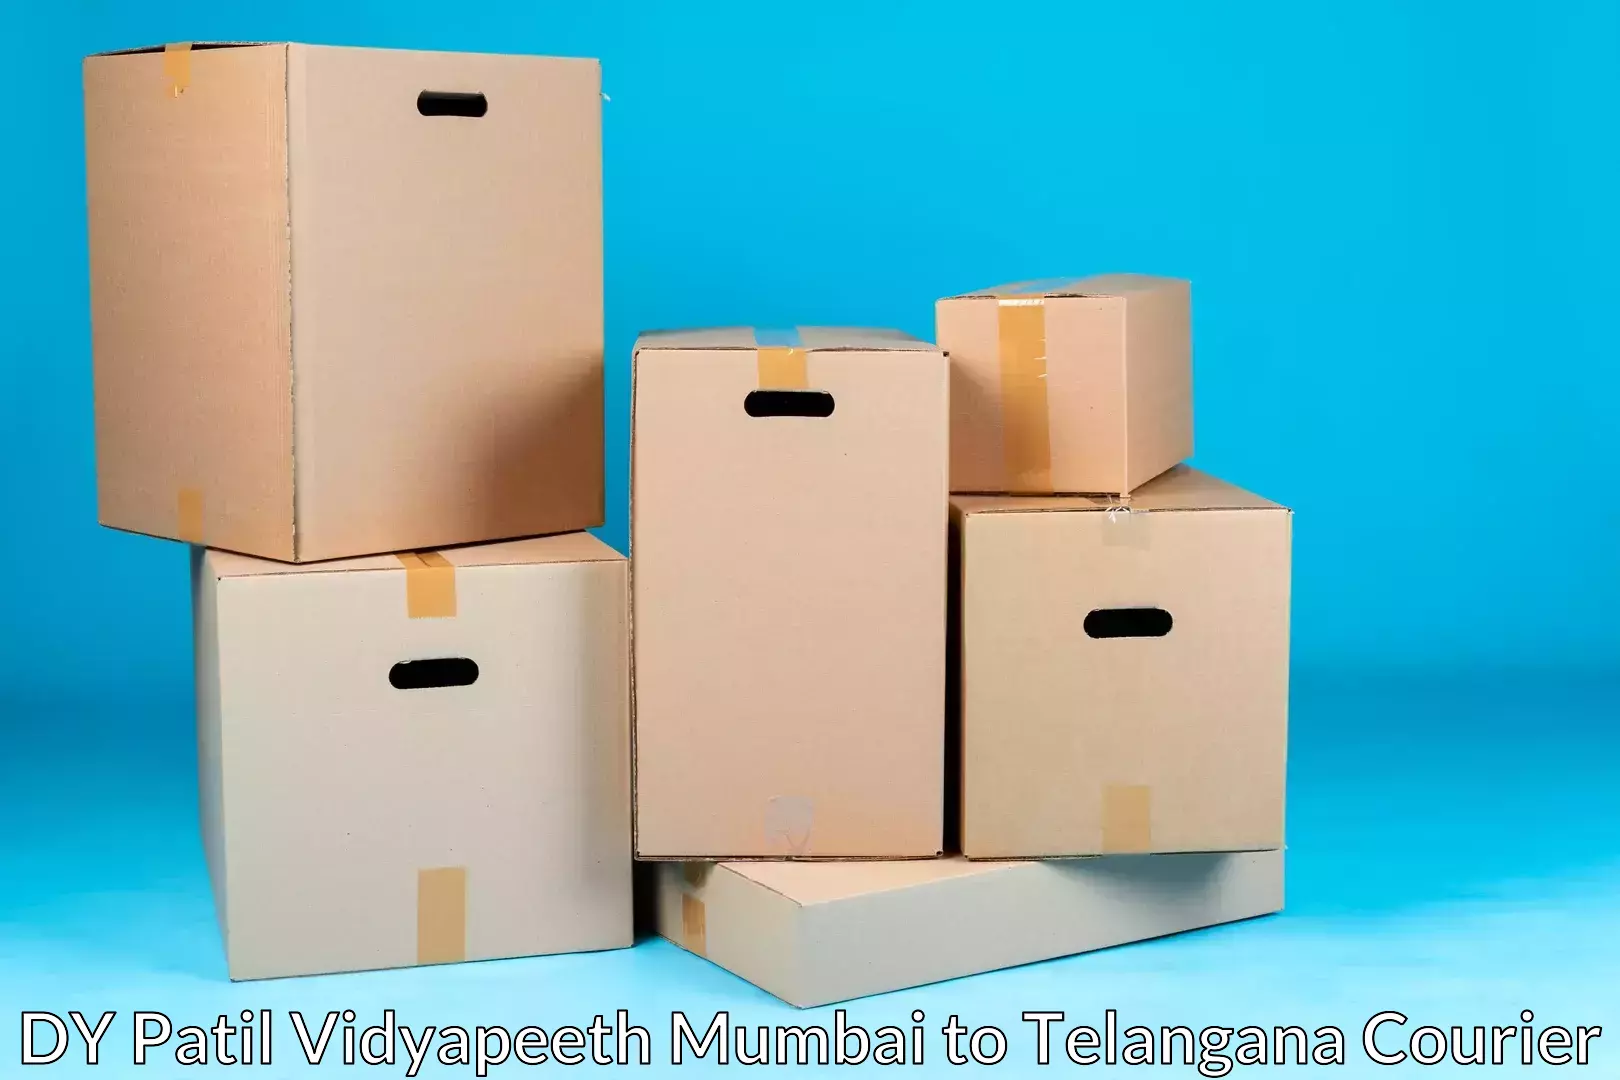 Residential moving experts in DY Patil Vidyapeeth Mumbai to Cheyyur